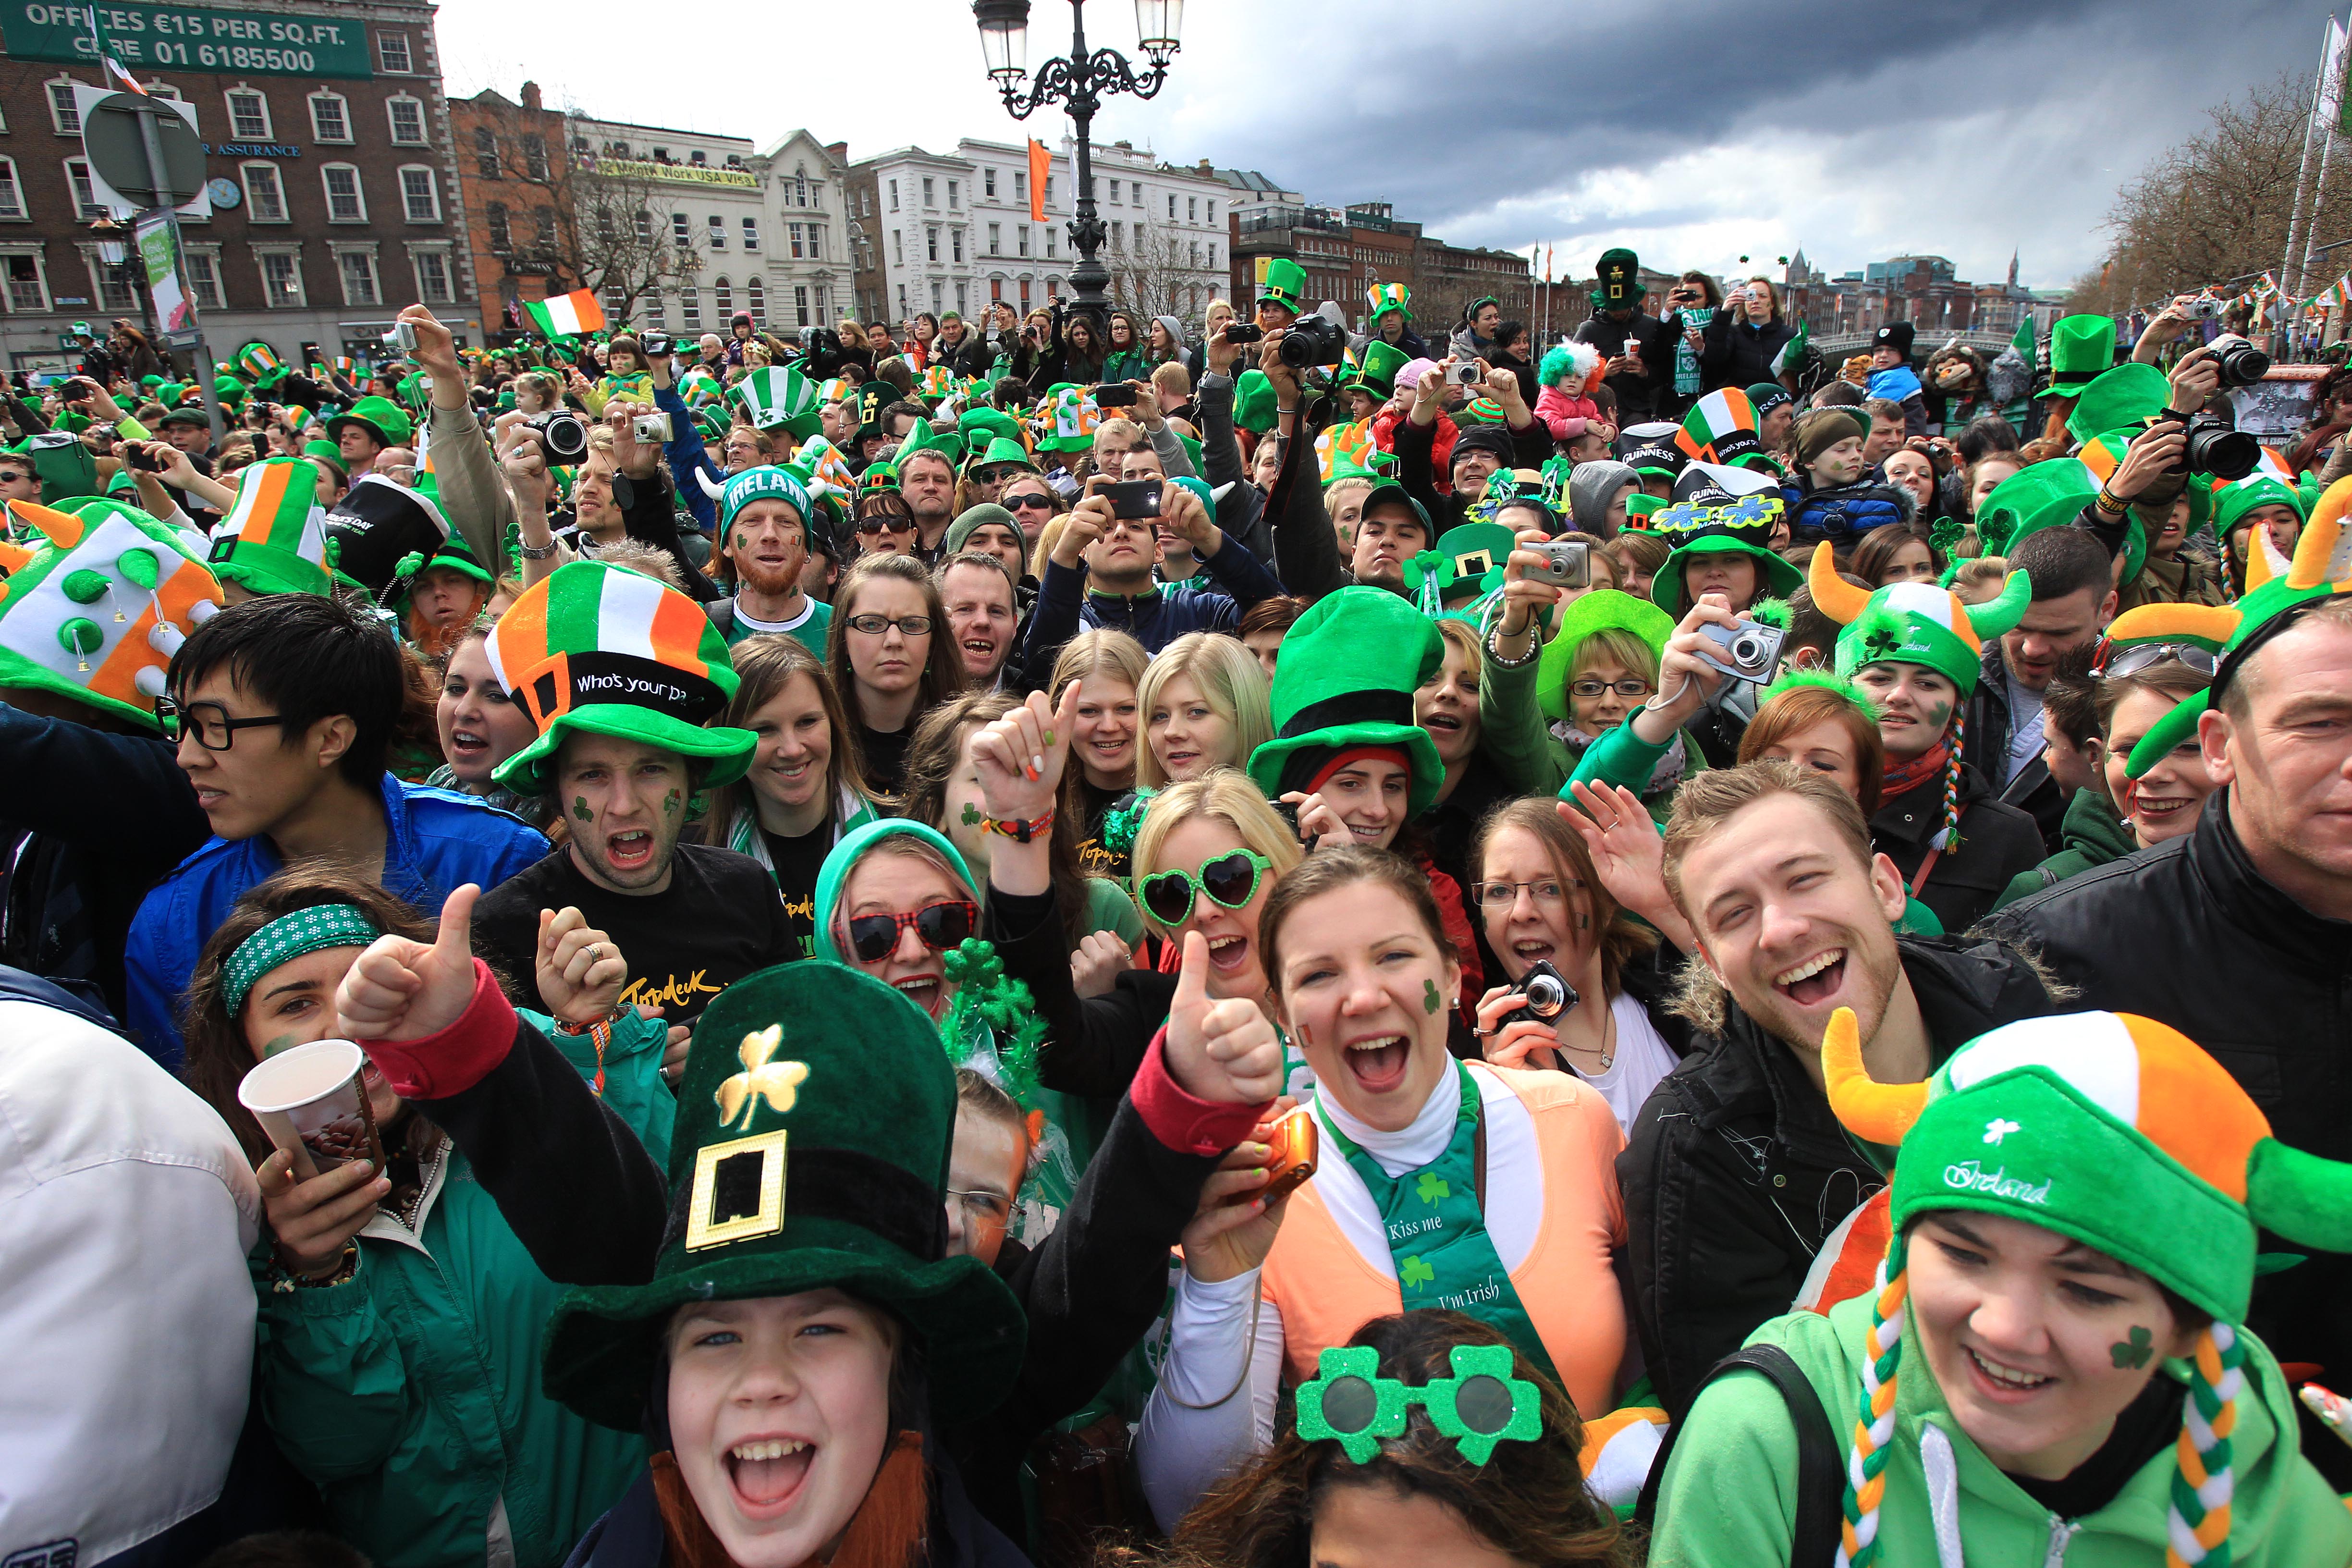 9 College St. Patrick's Day Celebrations That Are Among The Best You'll